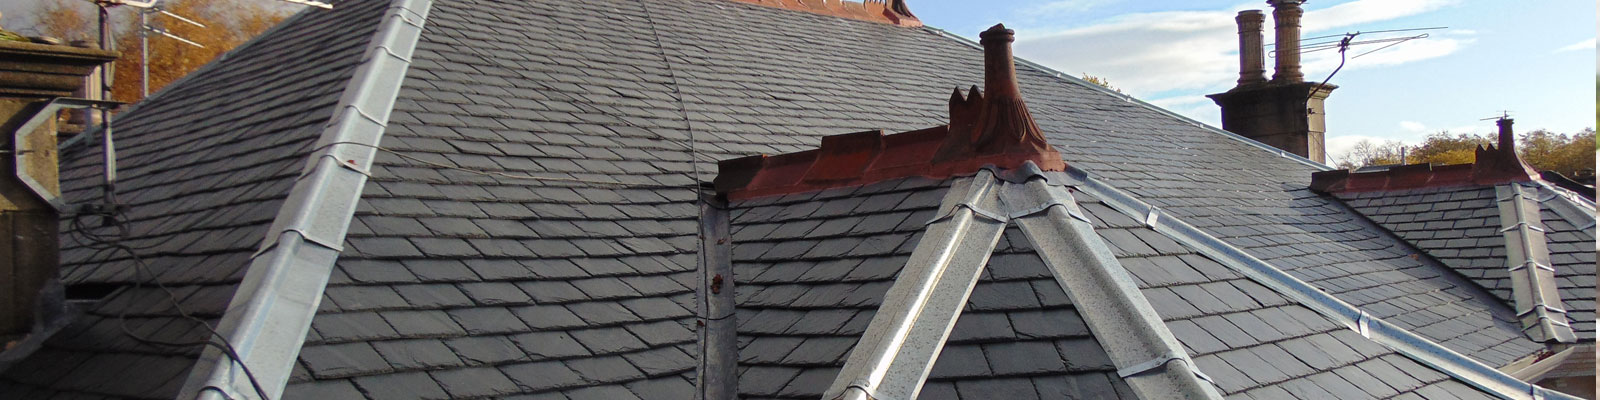 Slate Roofing Services across Glasgow